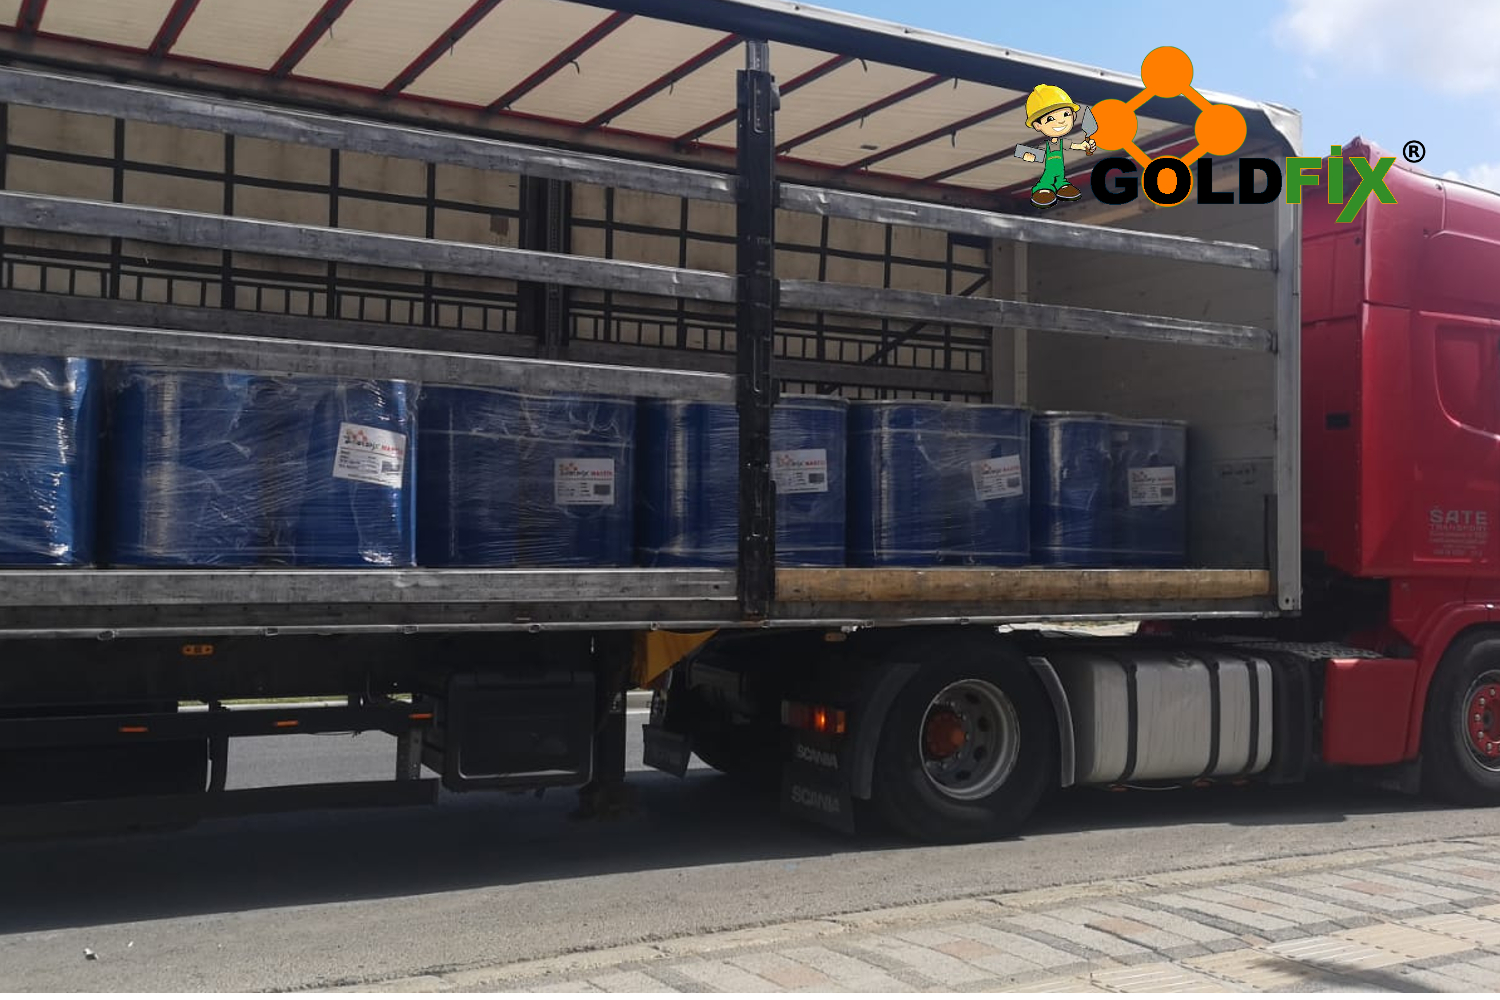 Goldfix Construction Chemicals are Exported to the World